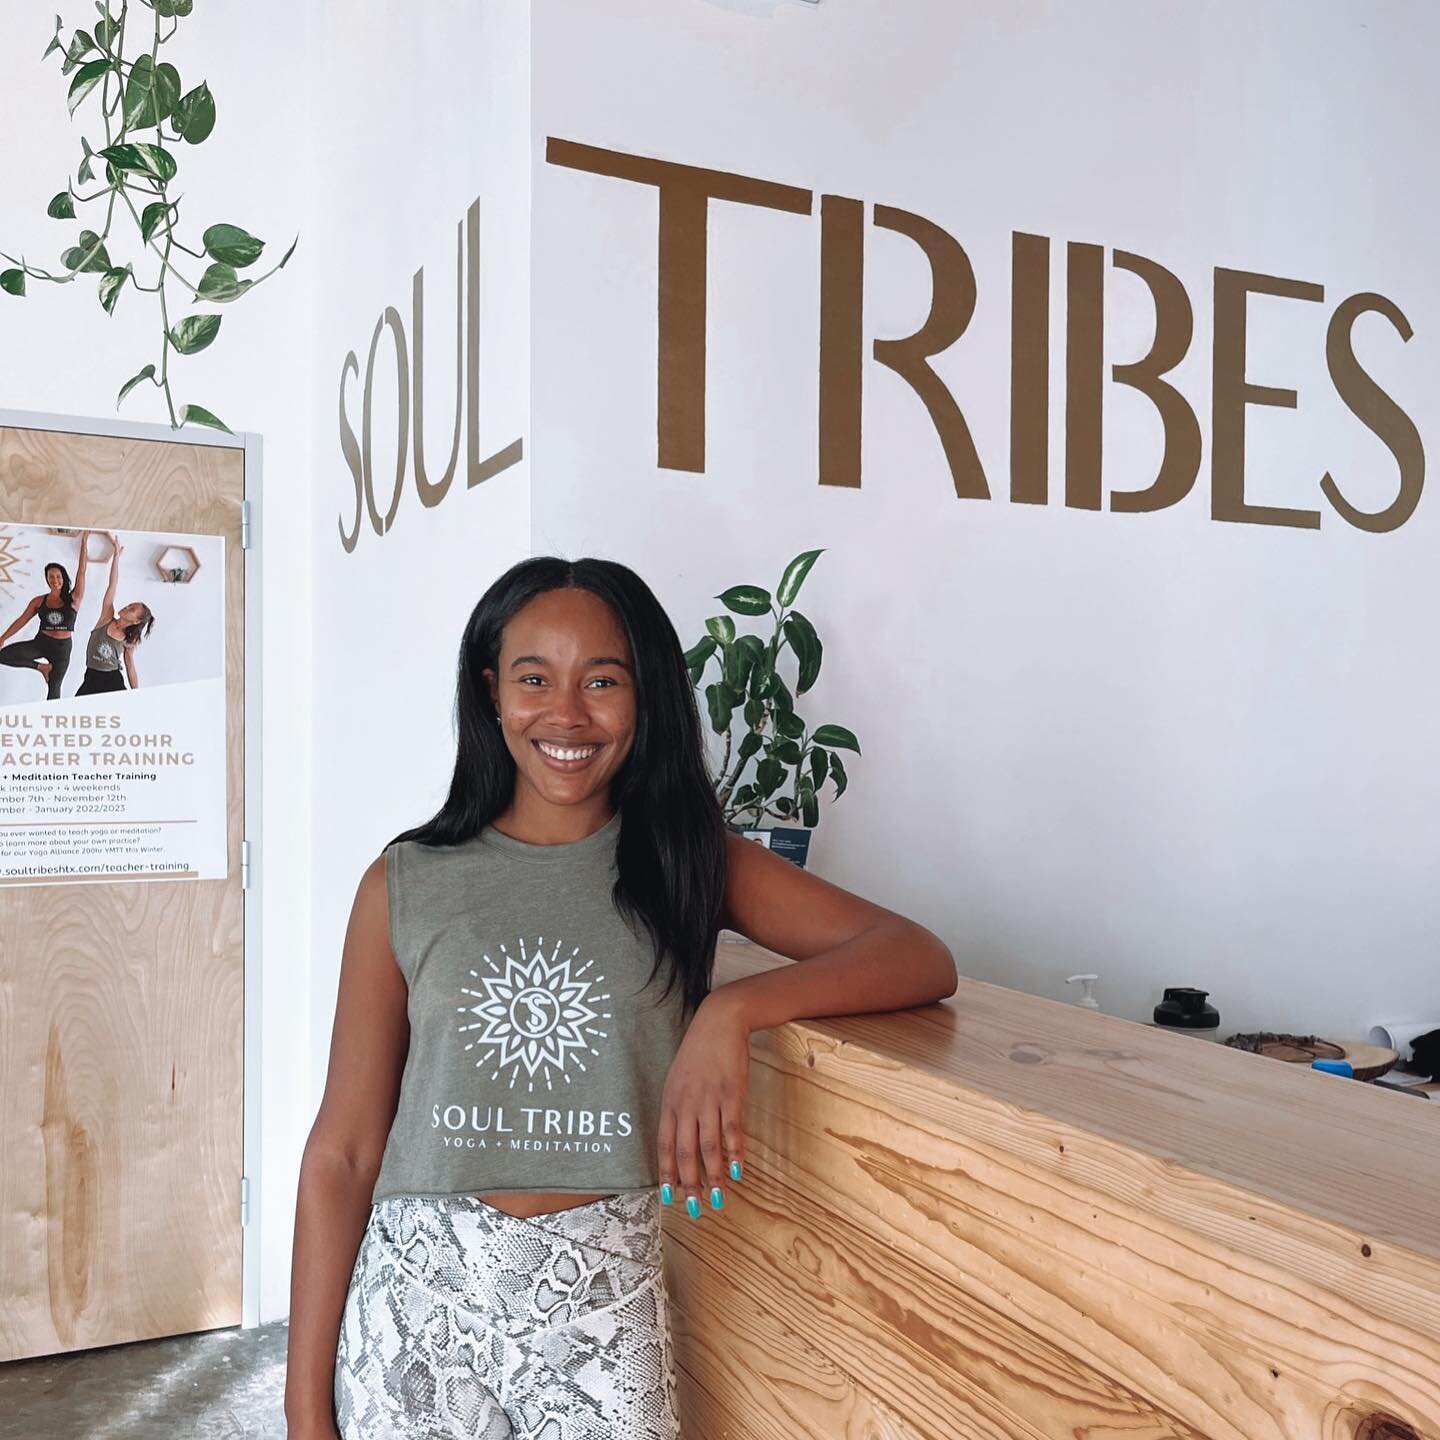 Join us in welcoming @imaniniccole to our teaching Tribe! 🥳🎉

Imani graduated from our yoga and meditation teacher training last fall. Since then she has been studying and practicing teaching with us in preparation for a permanent class on our sche